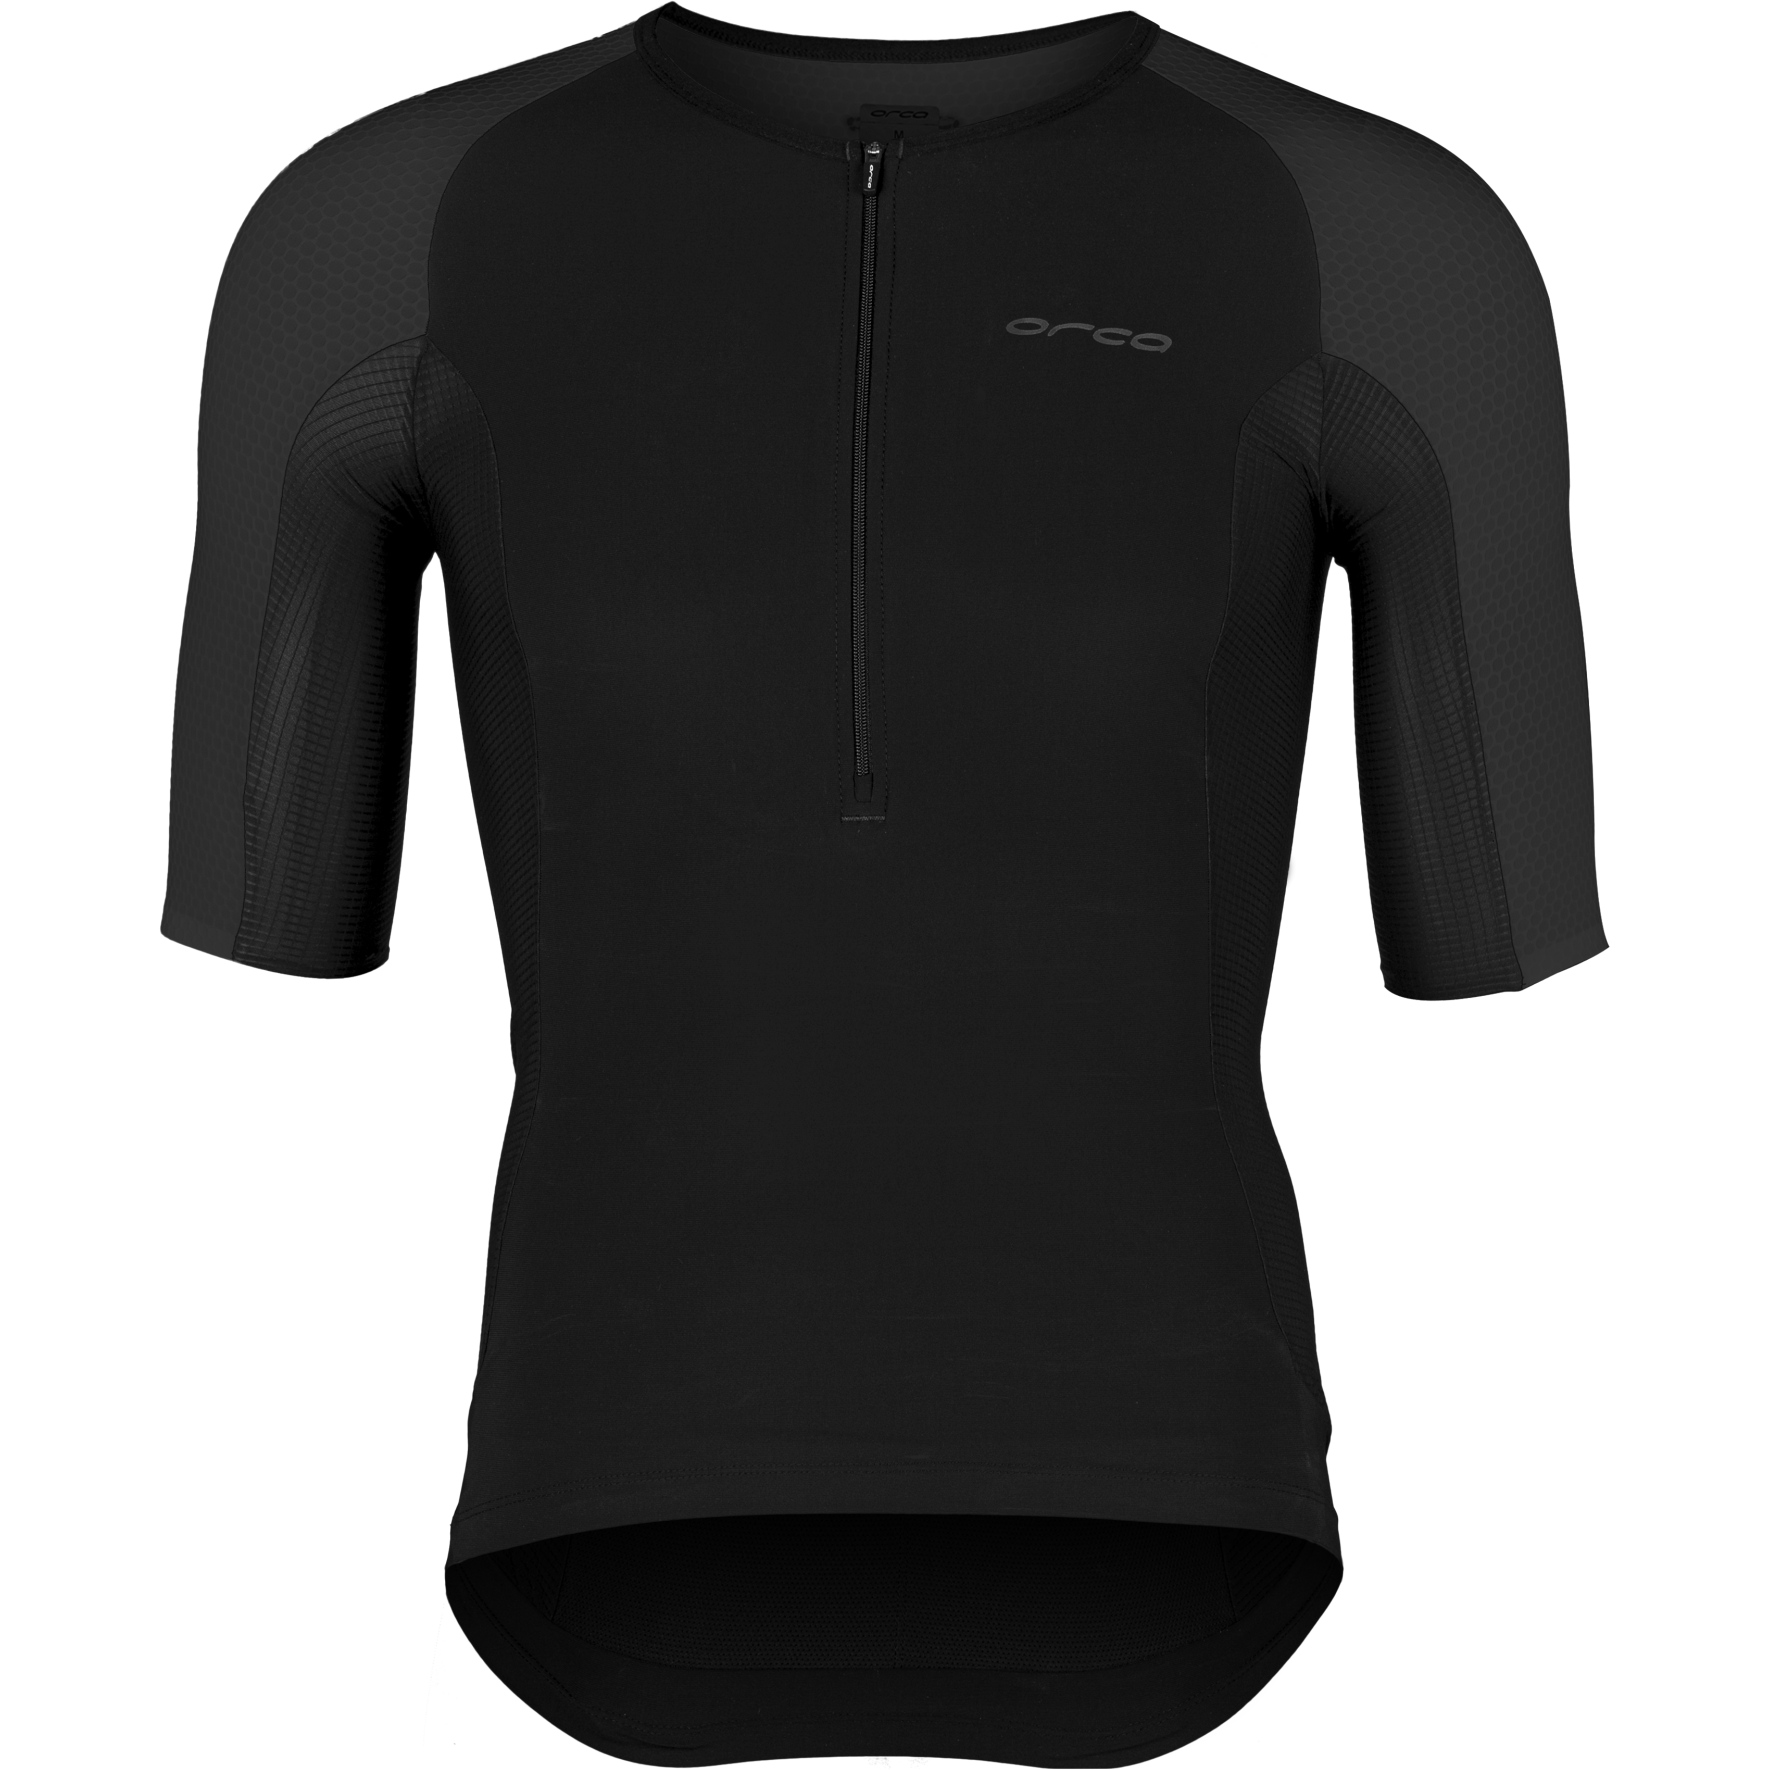 Picture of Orca Athlex Sleeved Tri Top - silver MP14